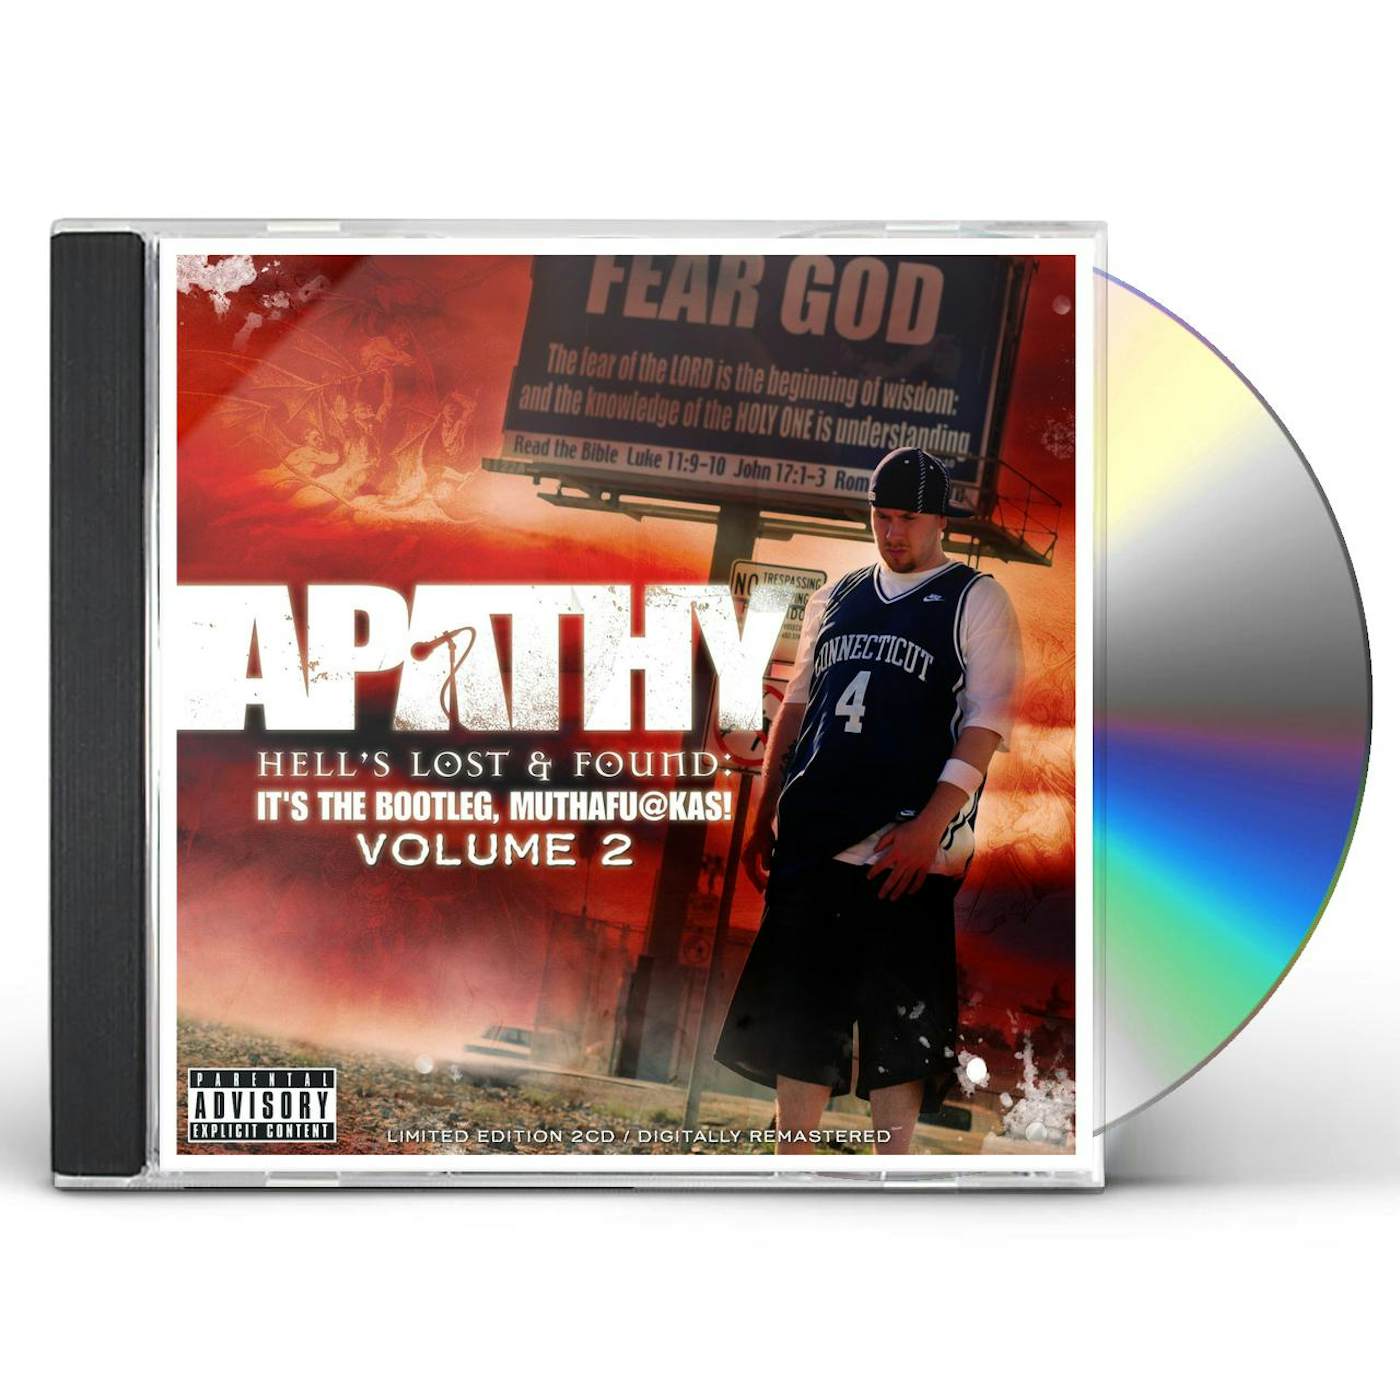 Apathy HELL'S LOST & FOUND: IT'S THE BOOTLEG MUTHAFUCKAS CD